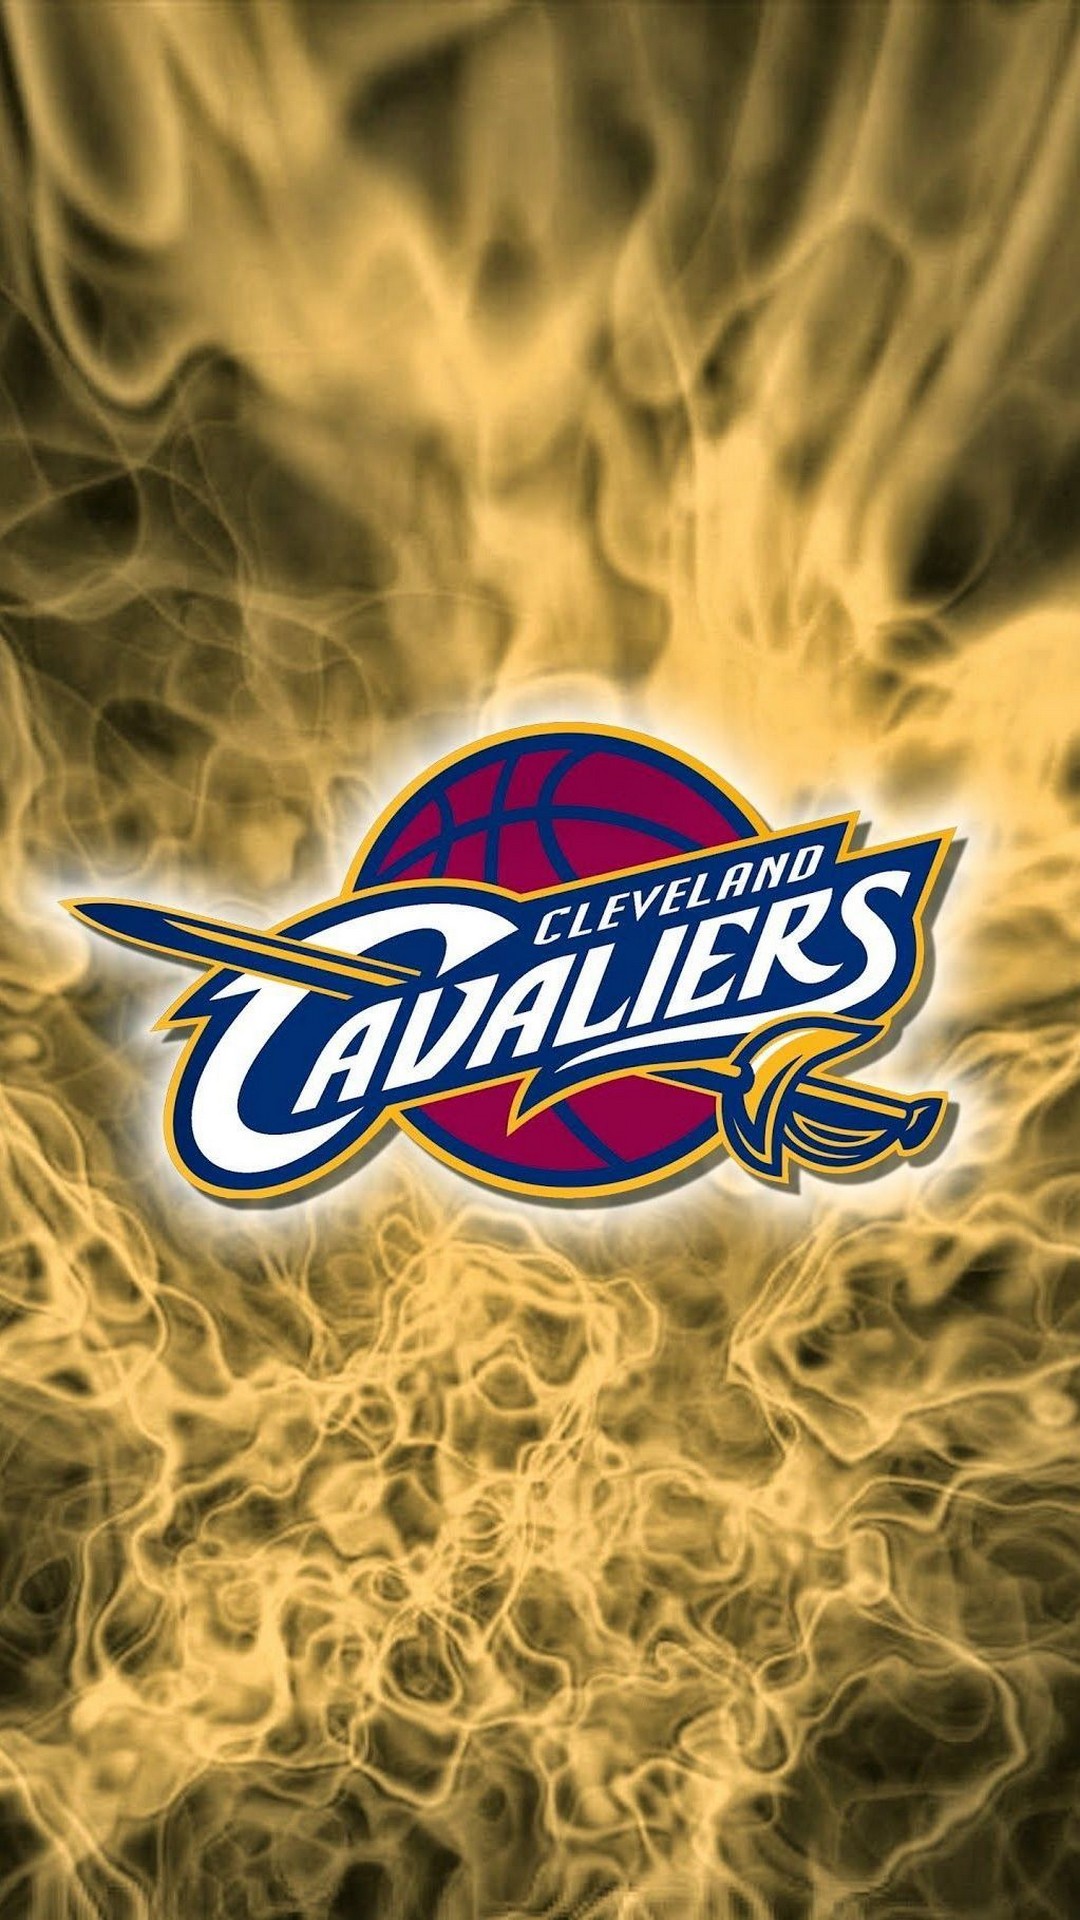 Cleveland Cavaliers Android Wallpapers resolution 1080x1920